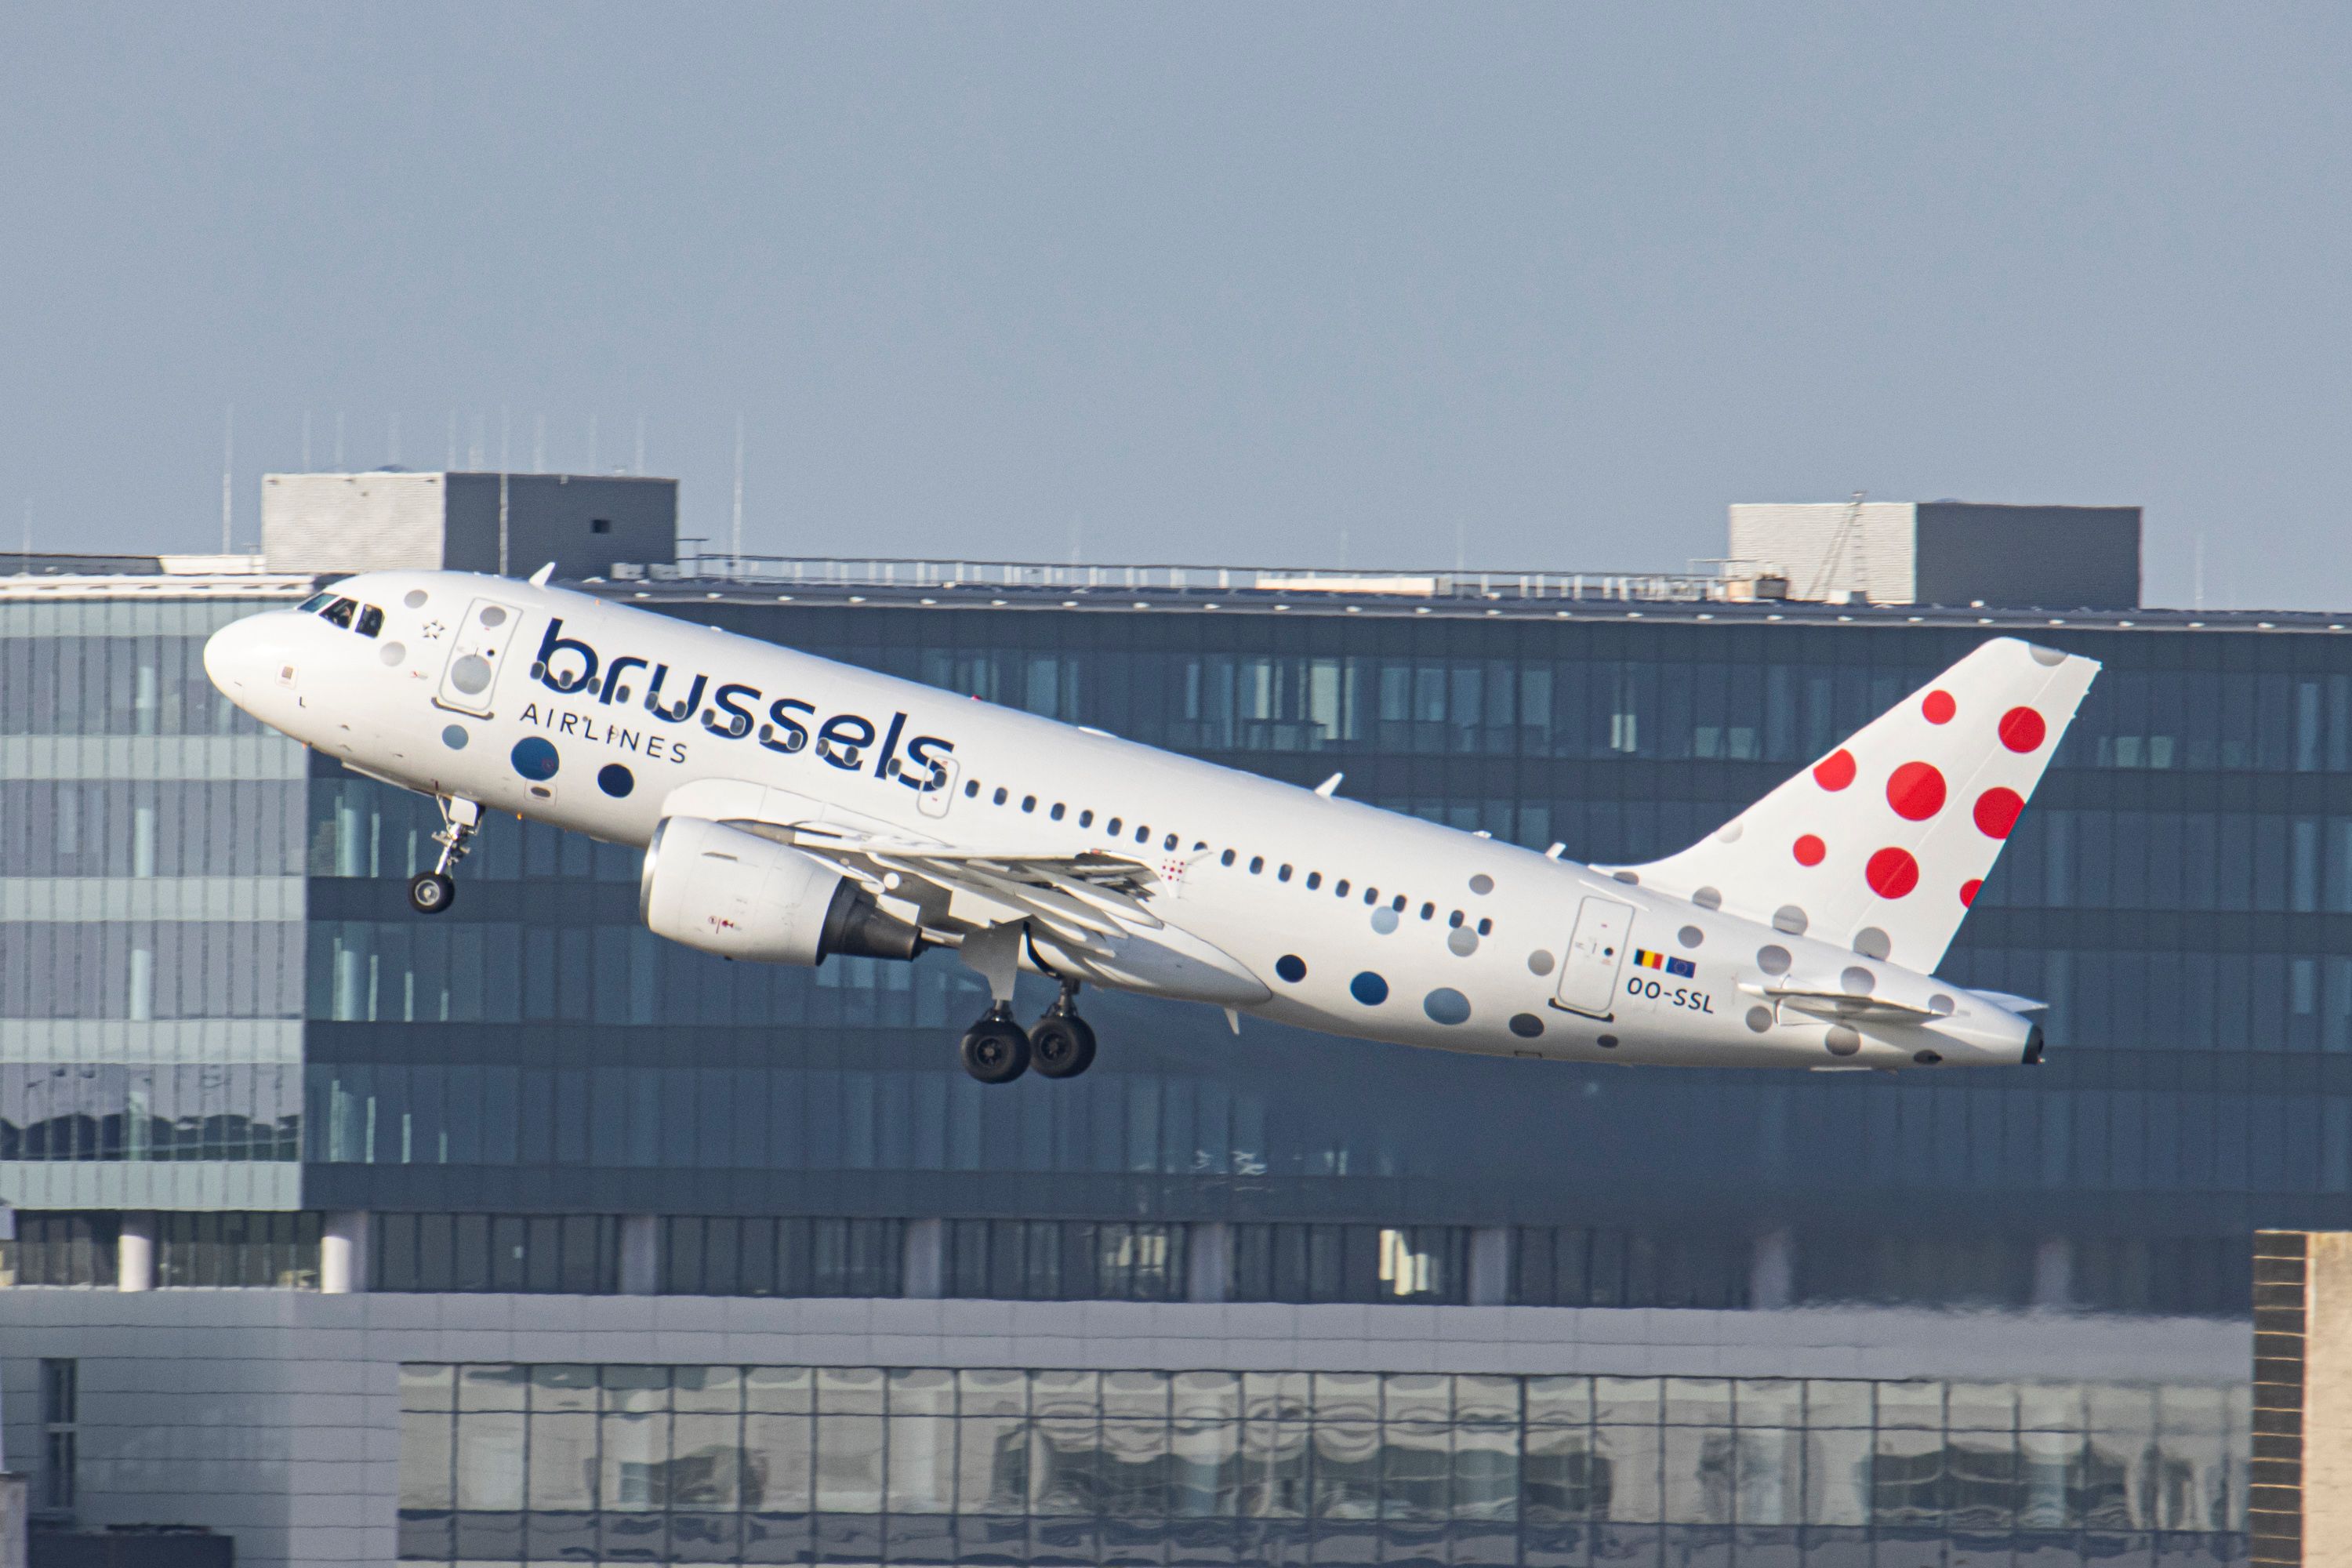 New_Livery_of_Brussels_Airlines_Aircraft